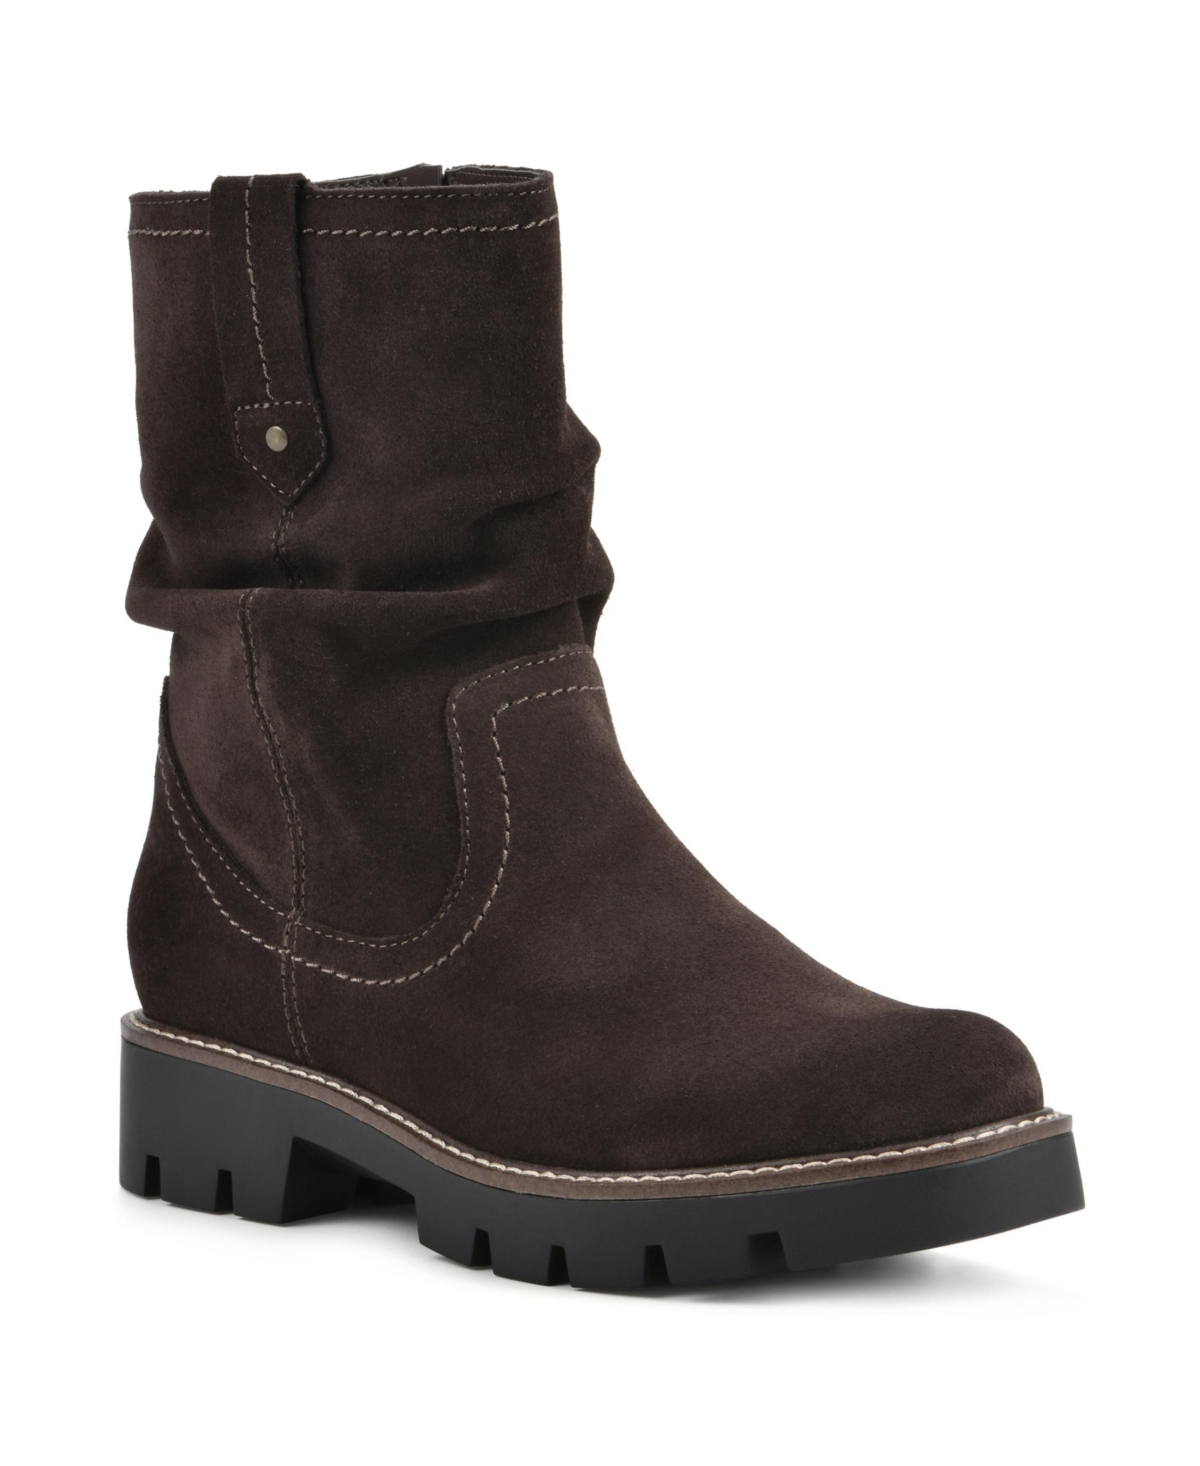 Women's Glean Lug Sole Mid Shaft Boots - Brown Suede